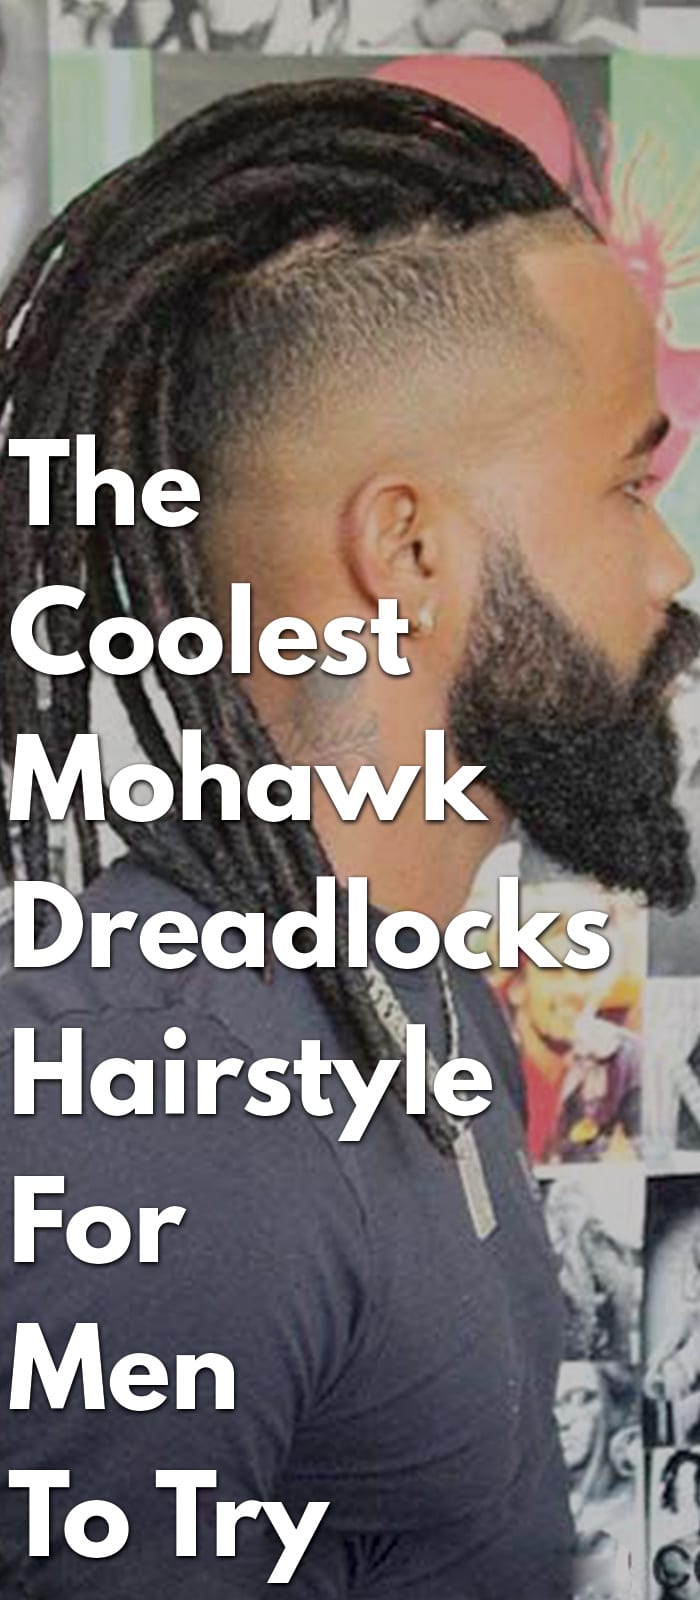 The Coolest Mohawk Dreadlocks Hairstyle